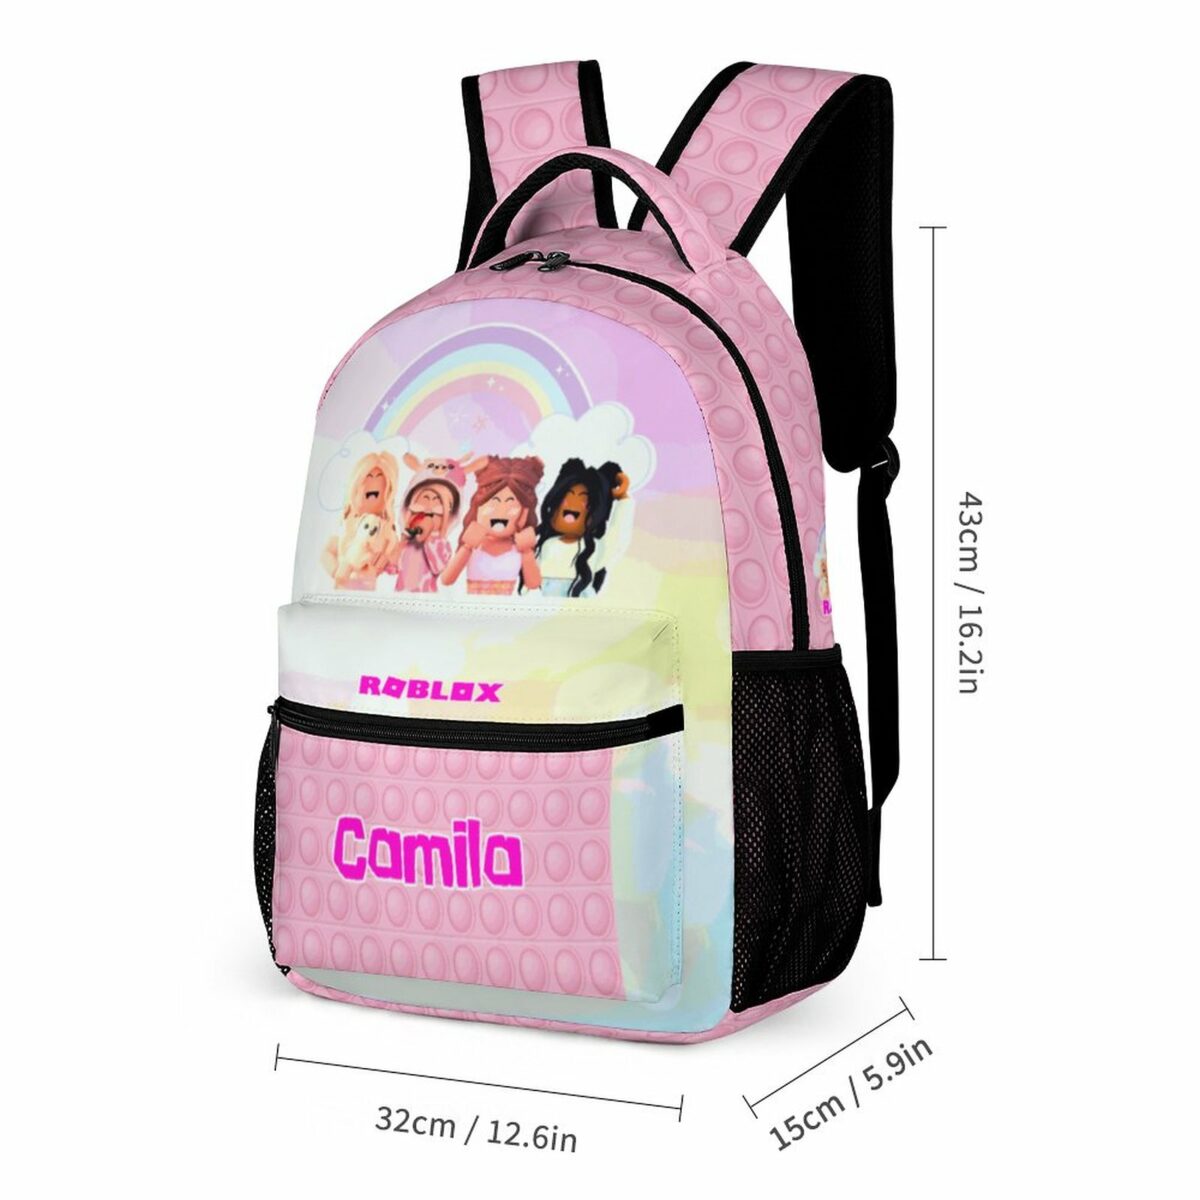 Personalized Name, Pink Roblox Girls Backpack with Avatars Characters on front Cool Kiddo 12